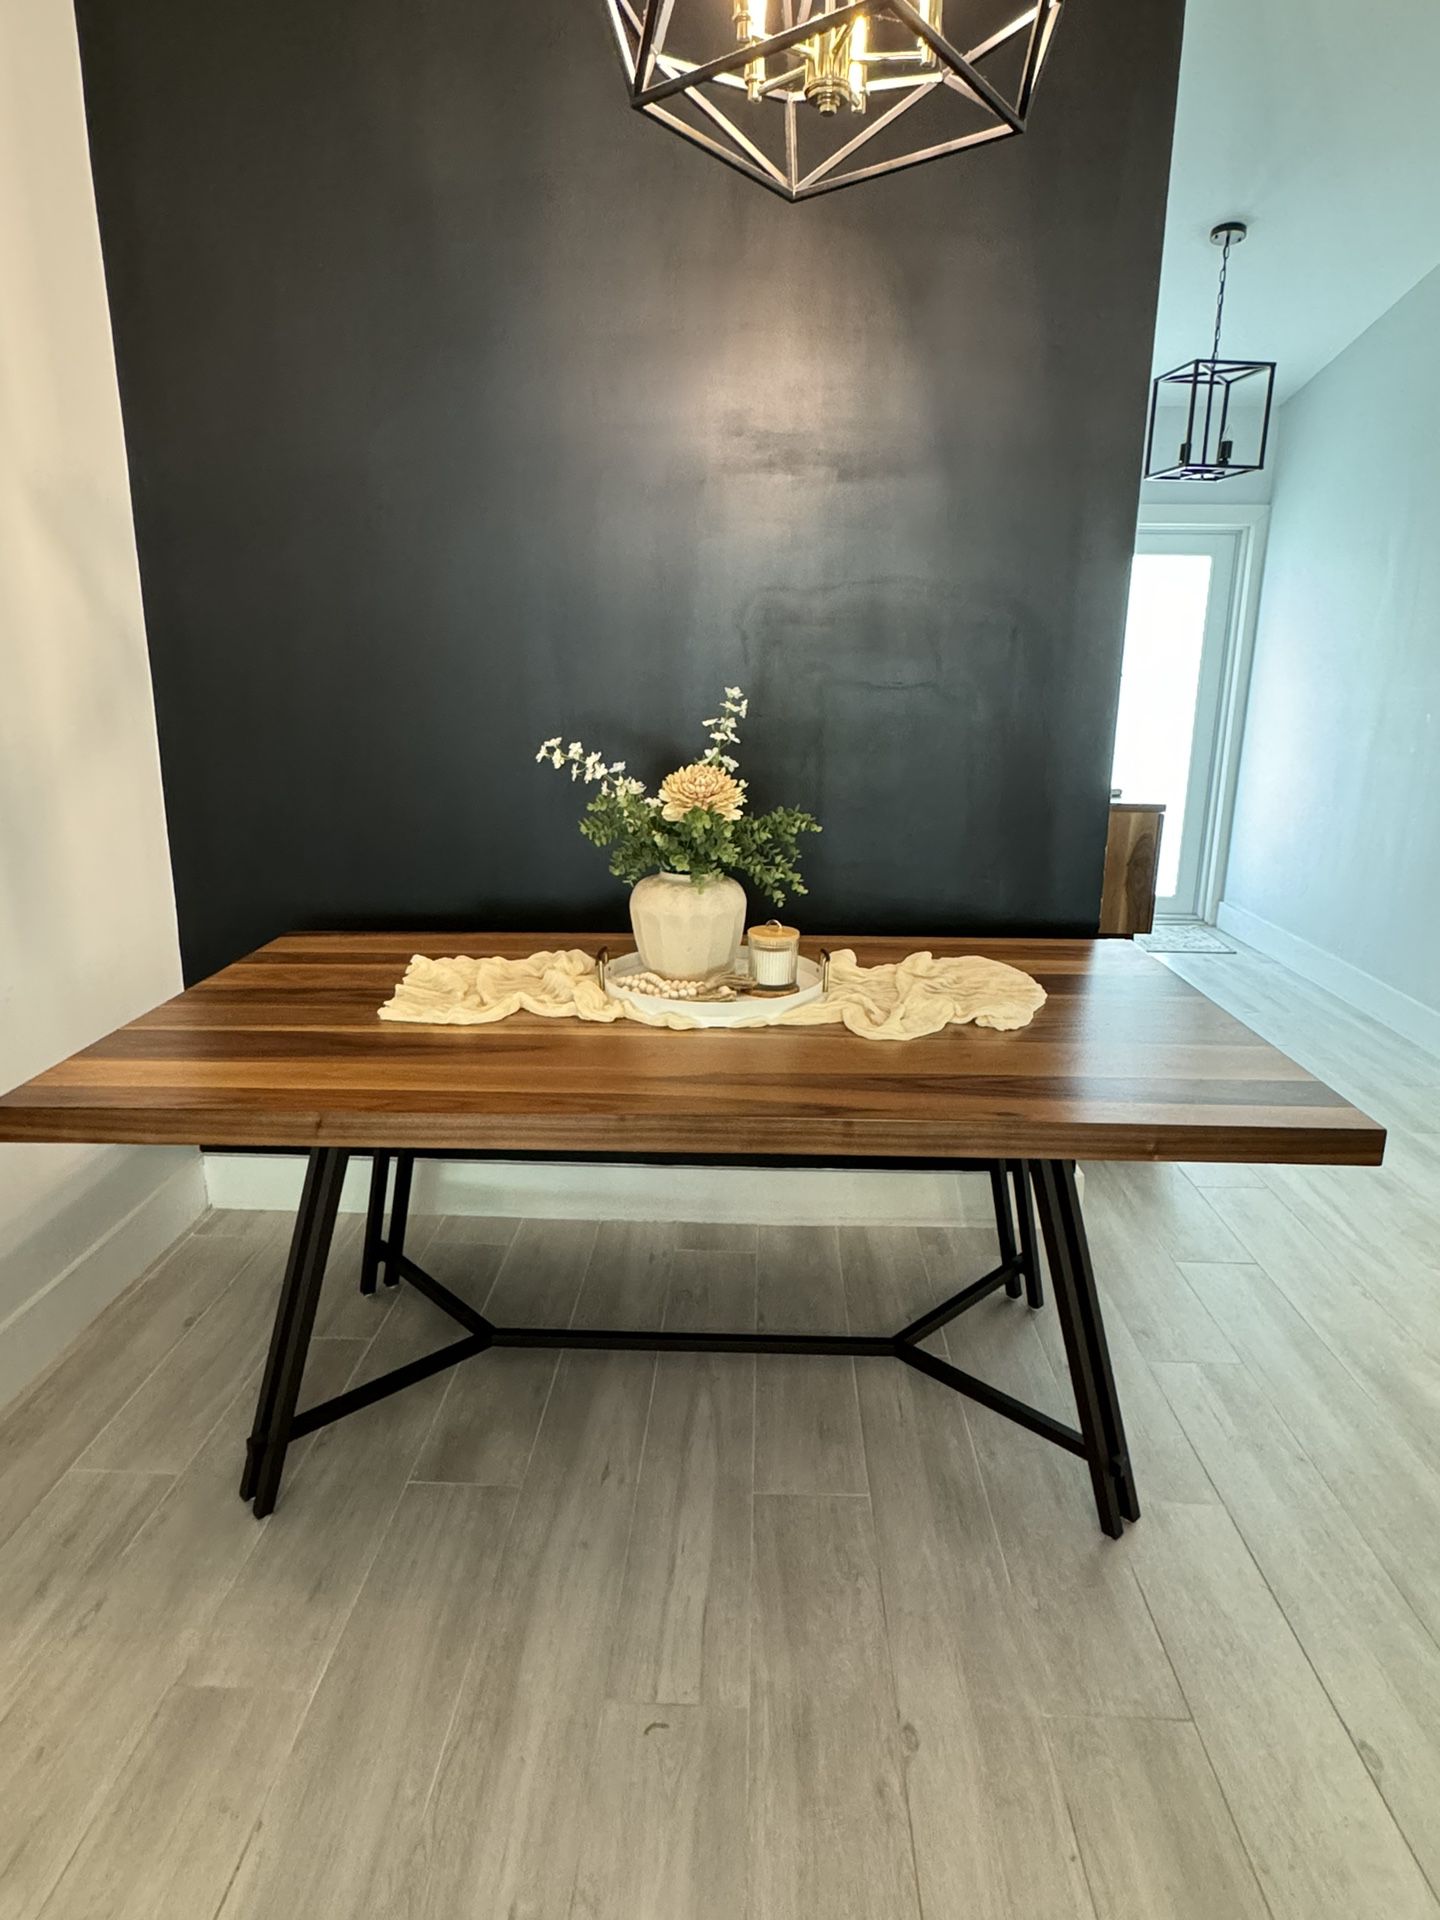 Dining Table (Brand New)